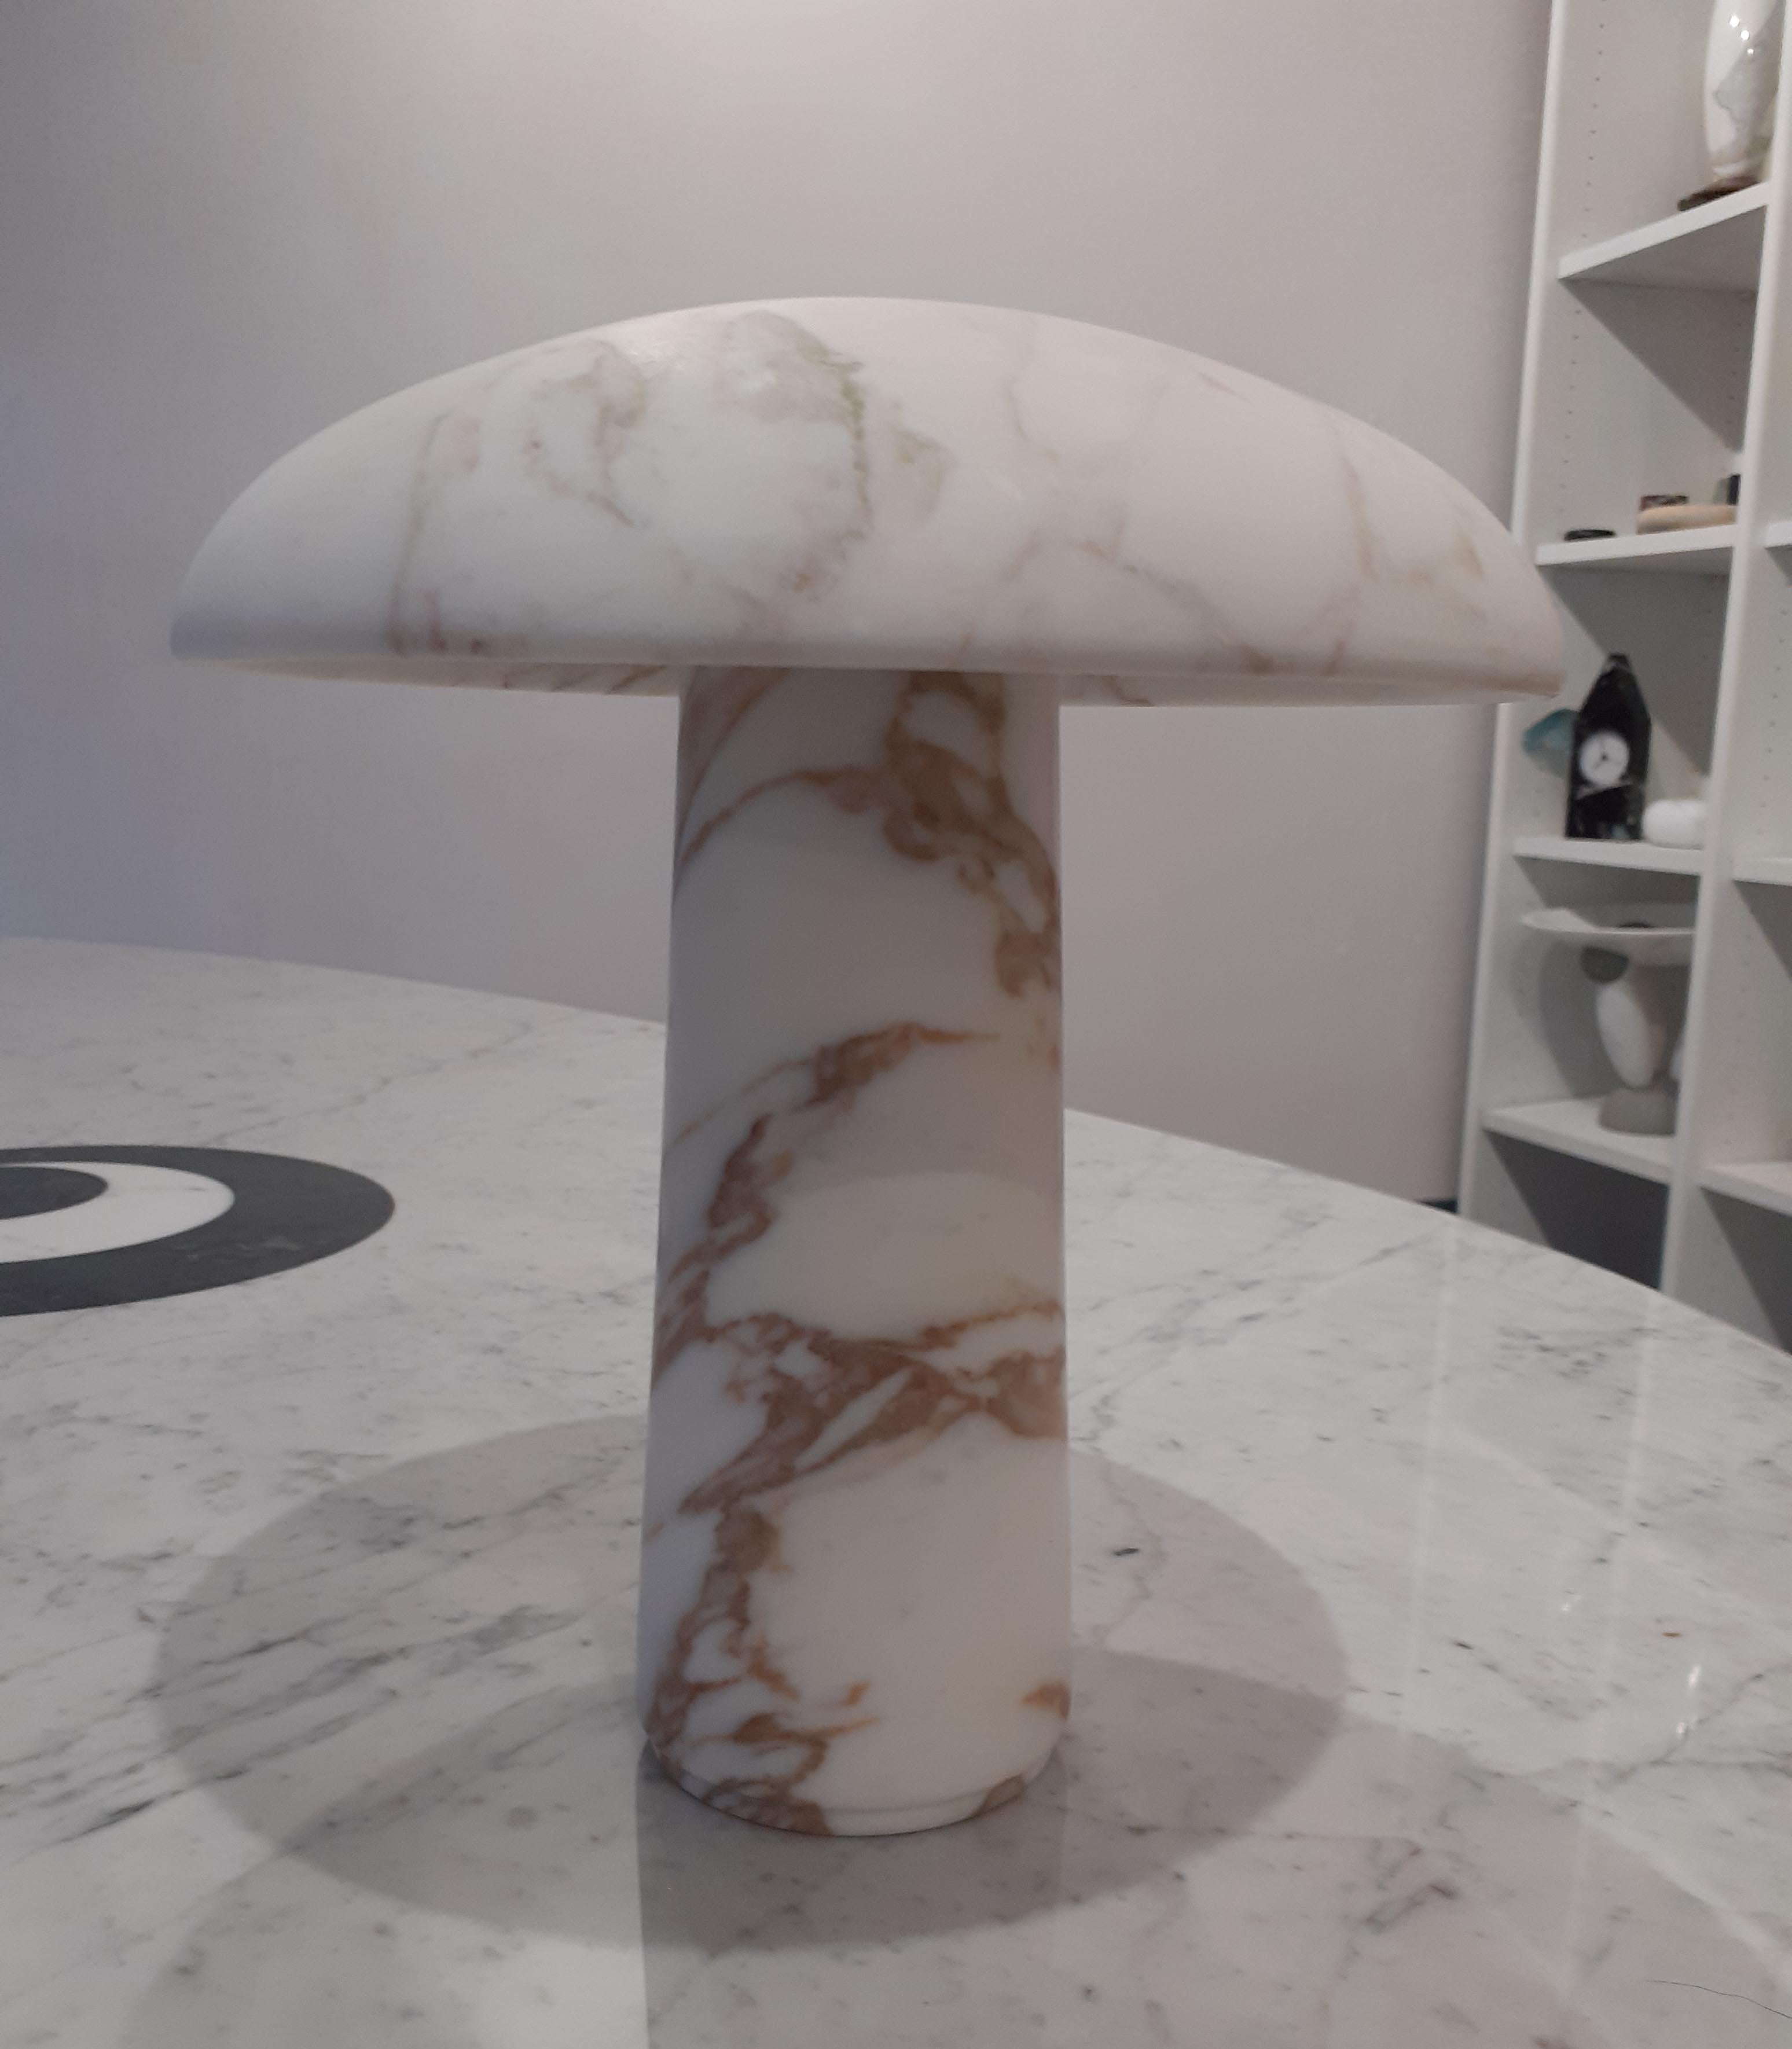 Mushroom marble lamp designed by Designer Marco Marino.
Available in Four different Material : Bianco Carrara,Calacatta, Calacatta Vagli & Arabescato with led ligthing.
Size: Diam. 30 x 36h
Materials: Bianco Carrara – Calacatta – Calacatta Vagli –